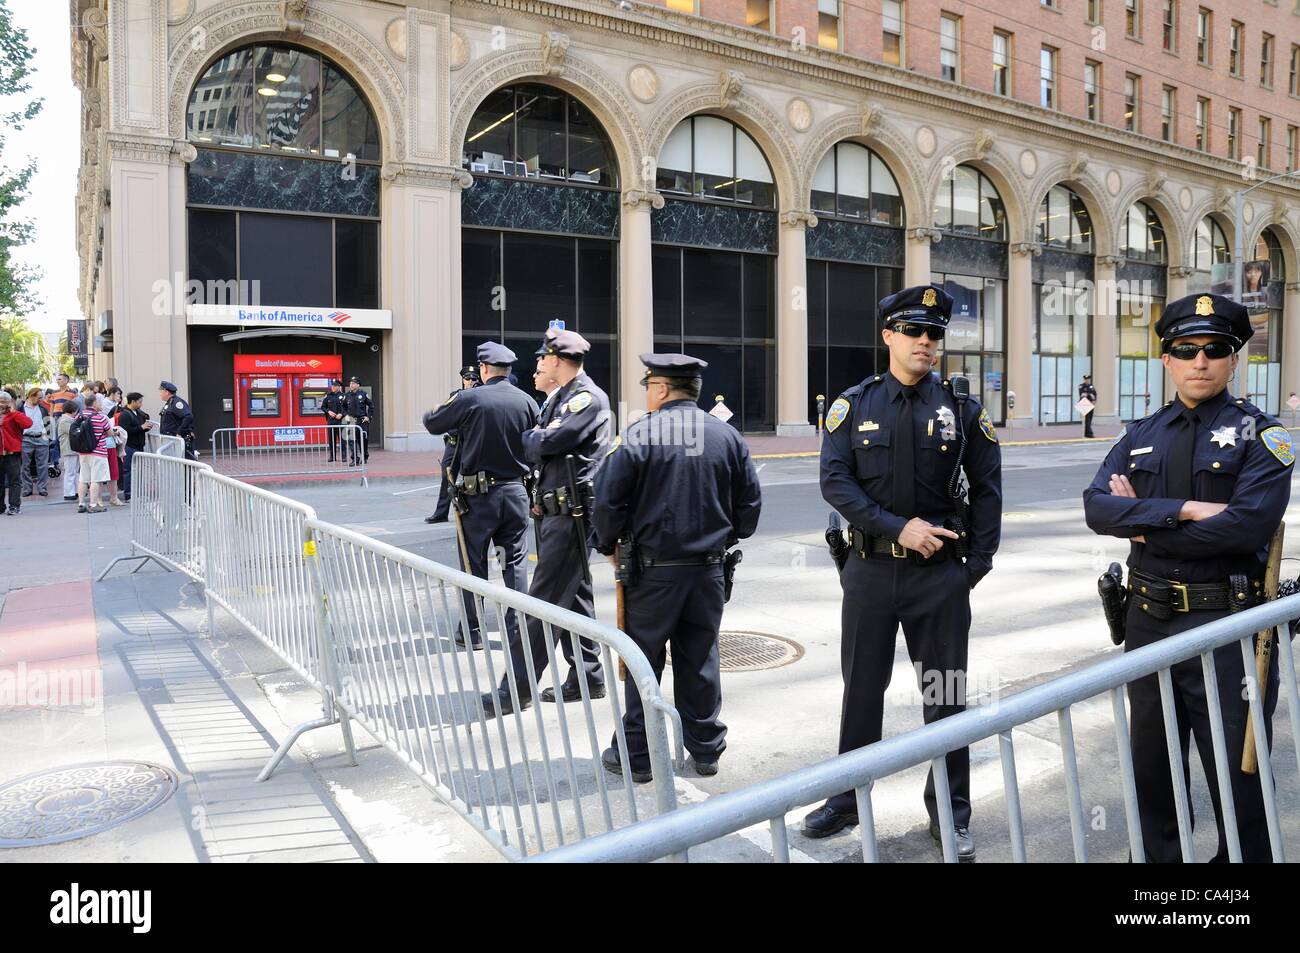 San Francisco, California, USA - June 06, 2012: Armed San Francisco Police Officers, cordon off Spear Street ahead of President Obama arriving for a financial meeting he has planned toward funding for his election campaign. Stock Photo